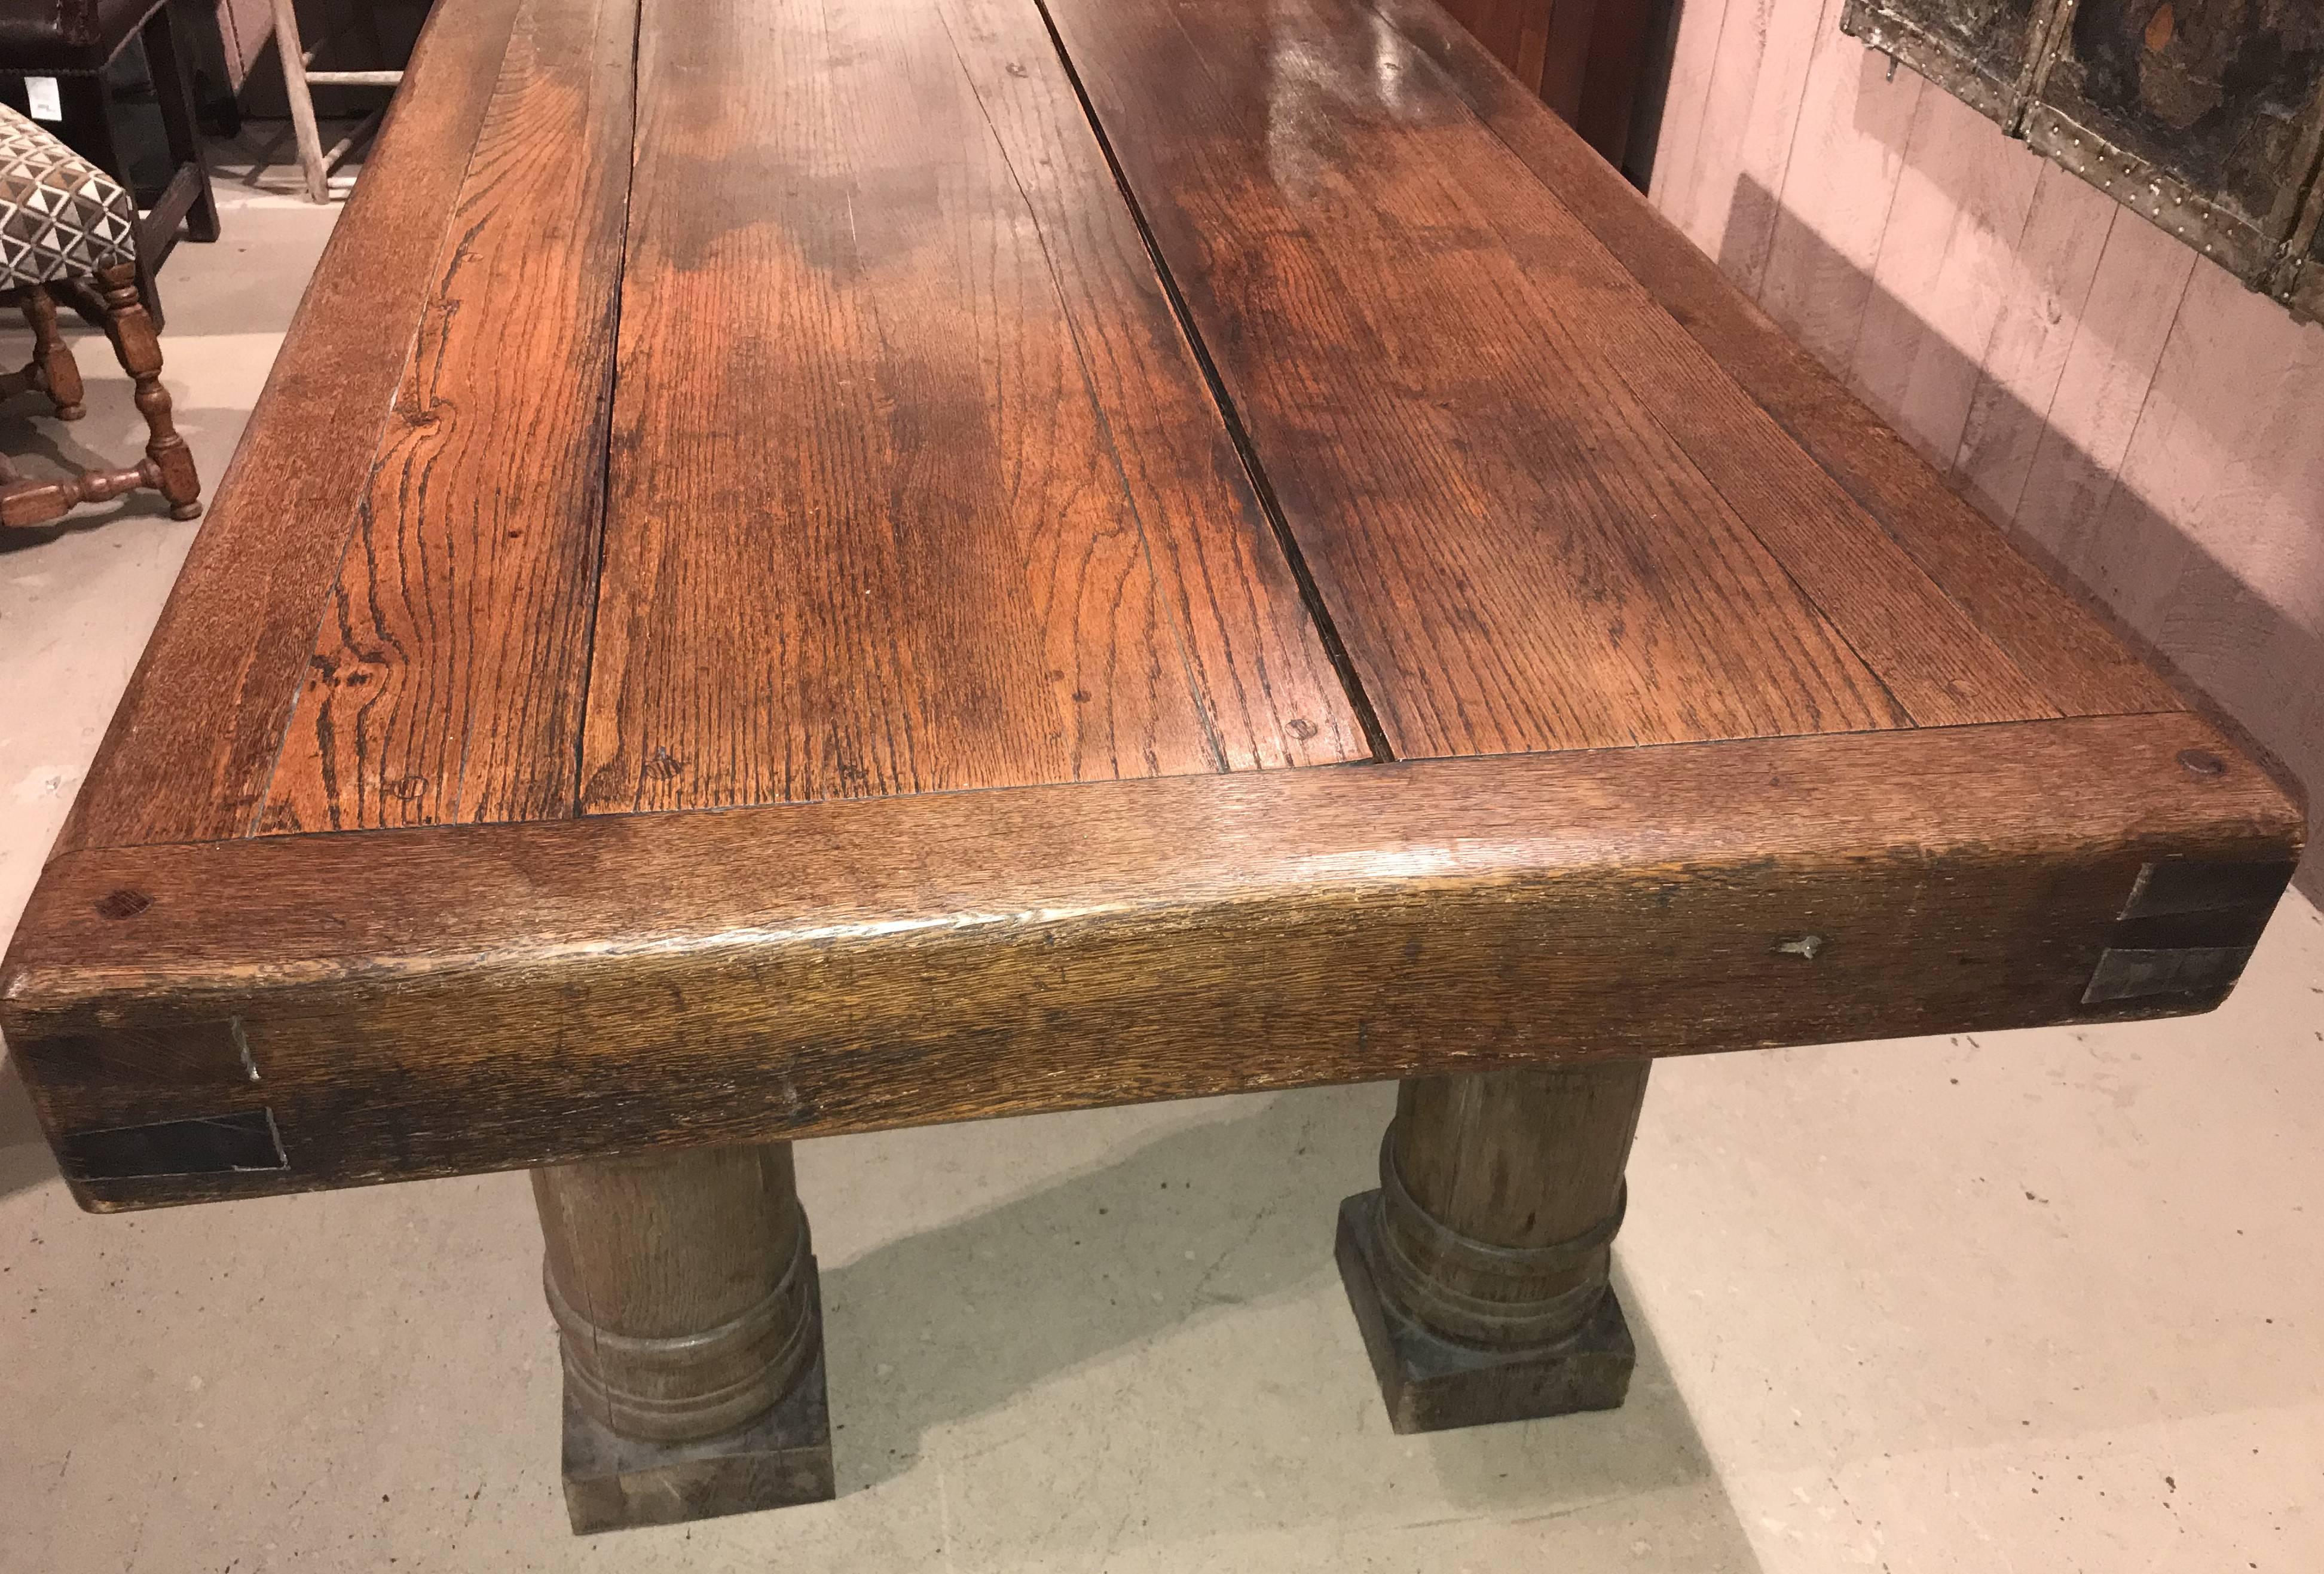 Hand-Carved 19th Century Continental Oak Refectory Table with Turned Leg Base